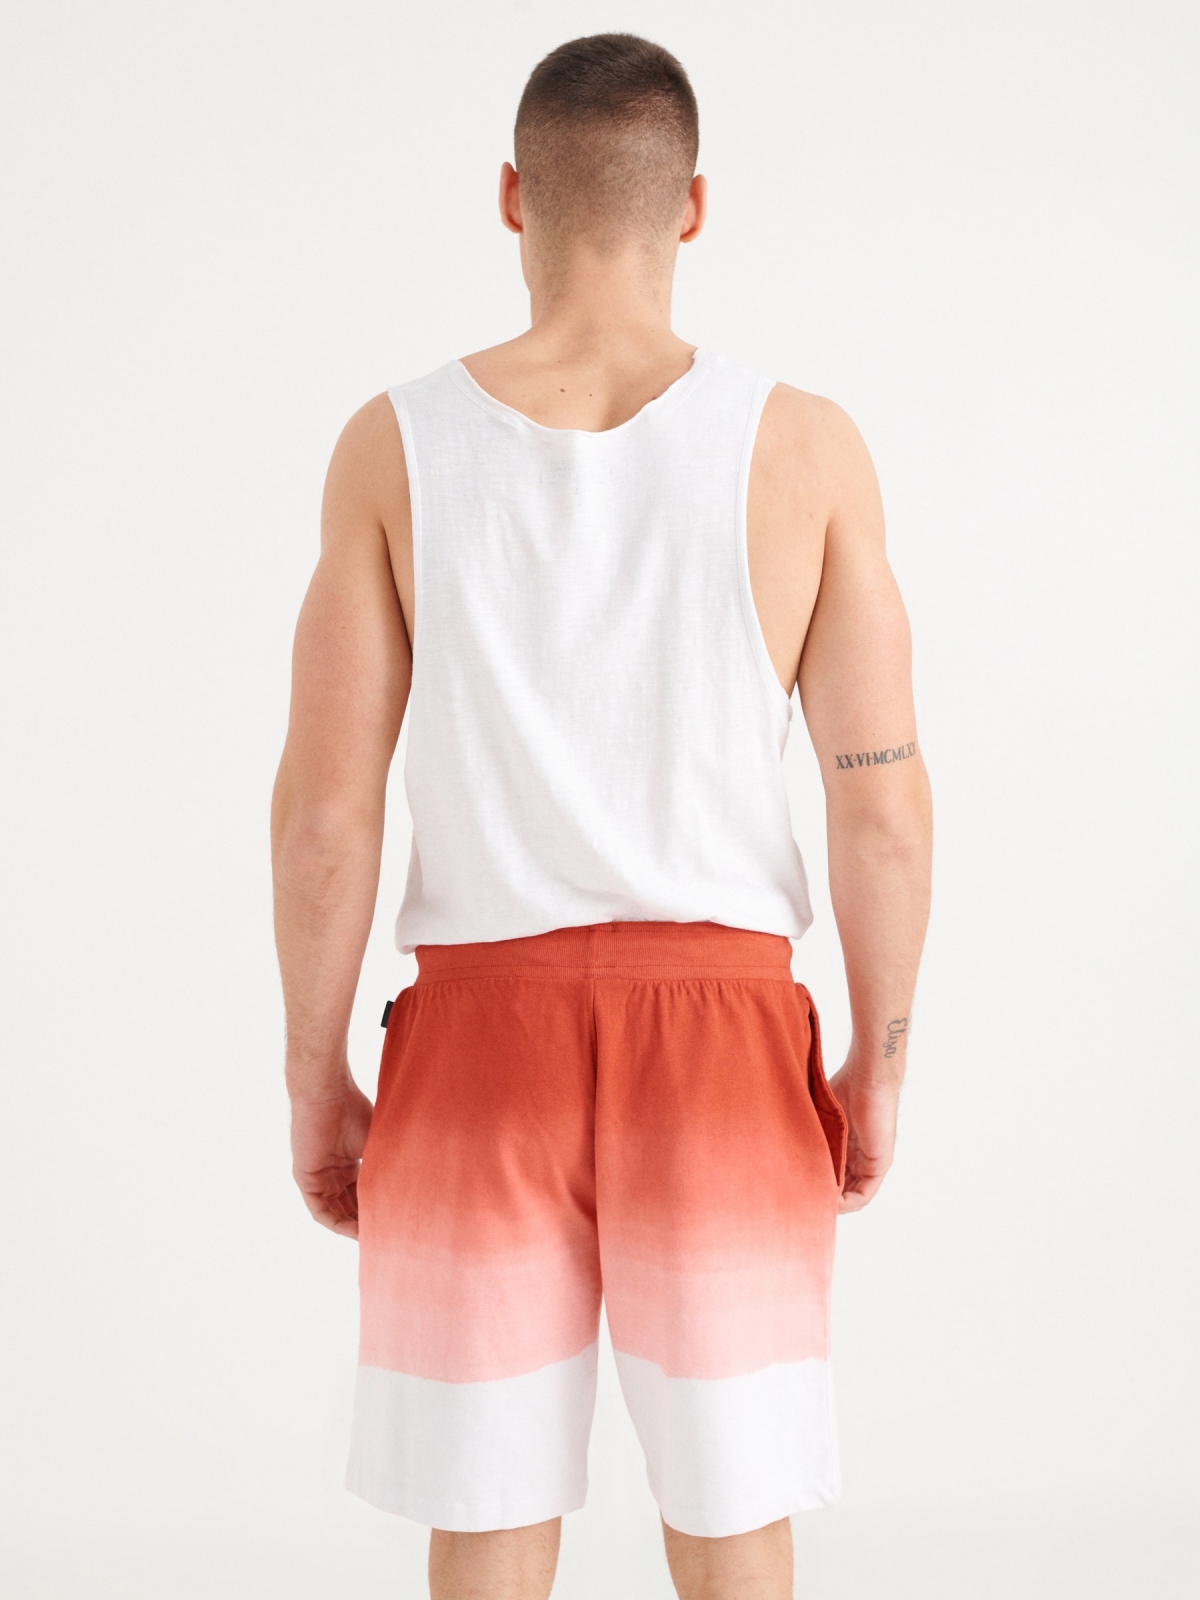 Gradient effect Bermuda shorts orangish red middle back view